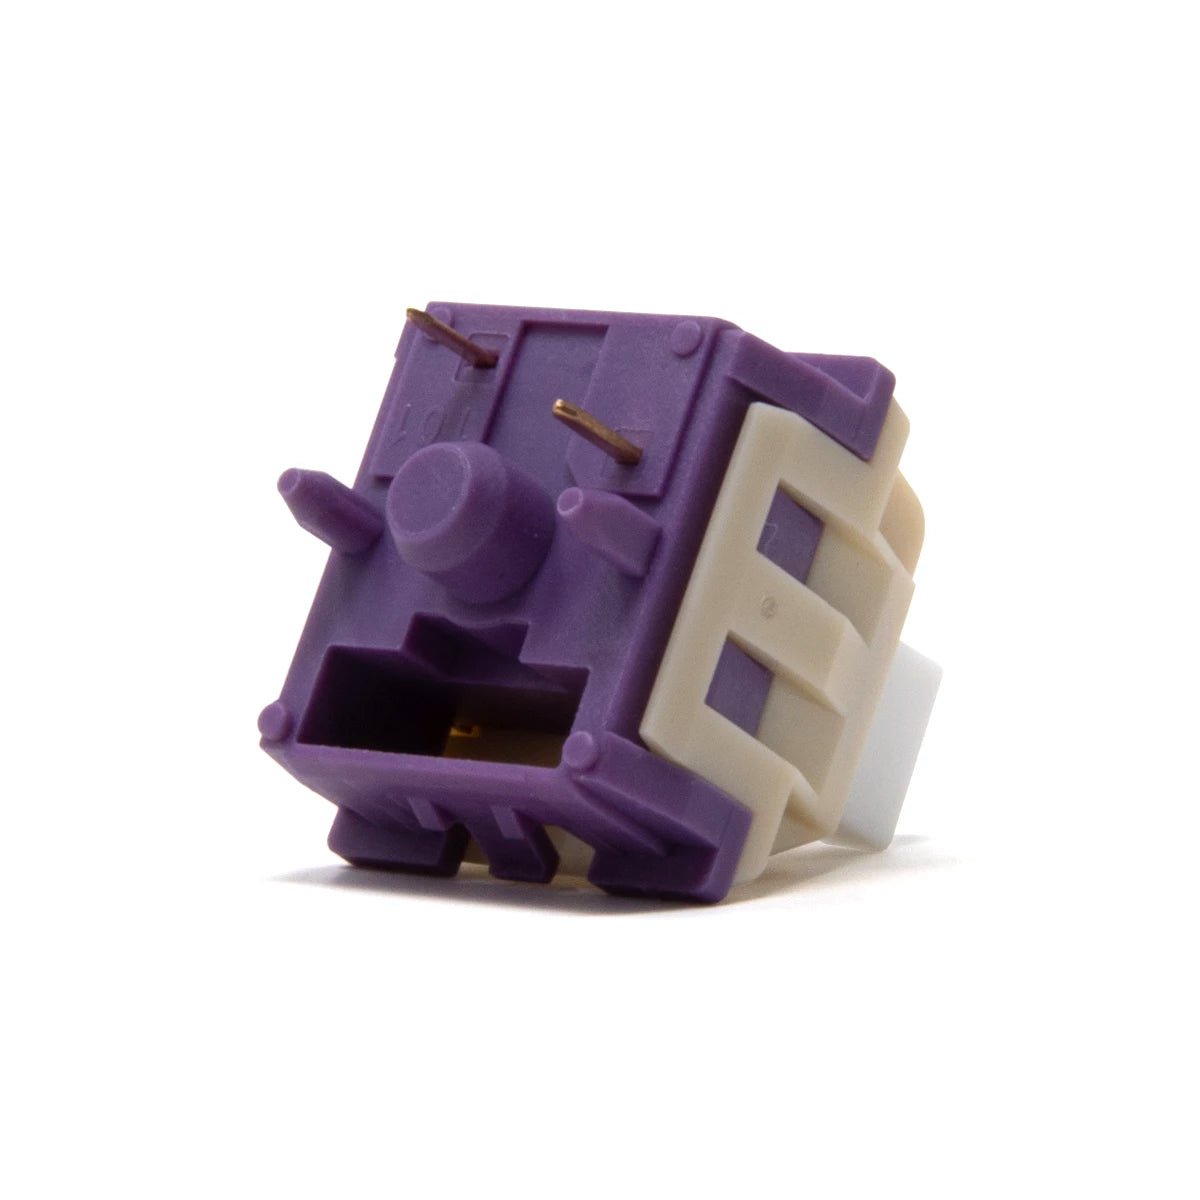 Wuque WS Onion Linear Switches - Divinikey